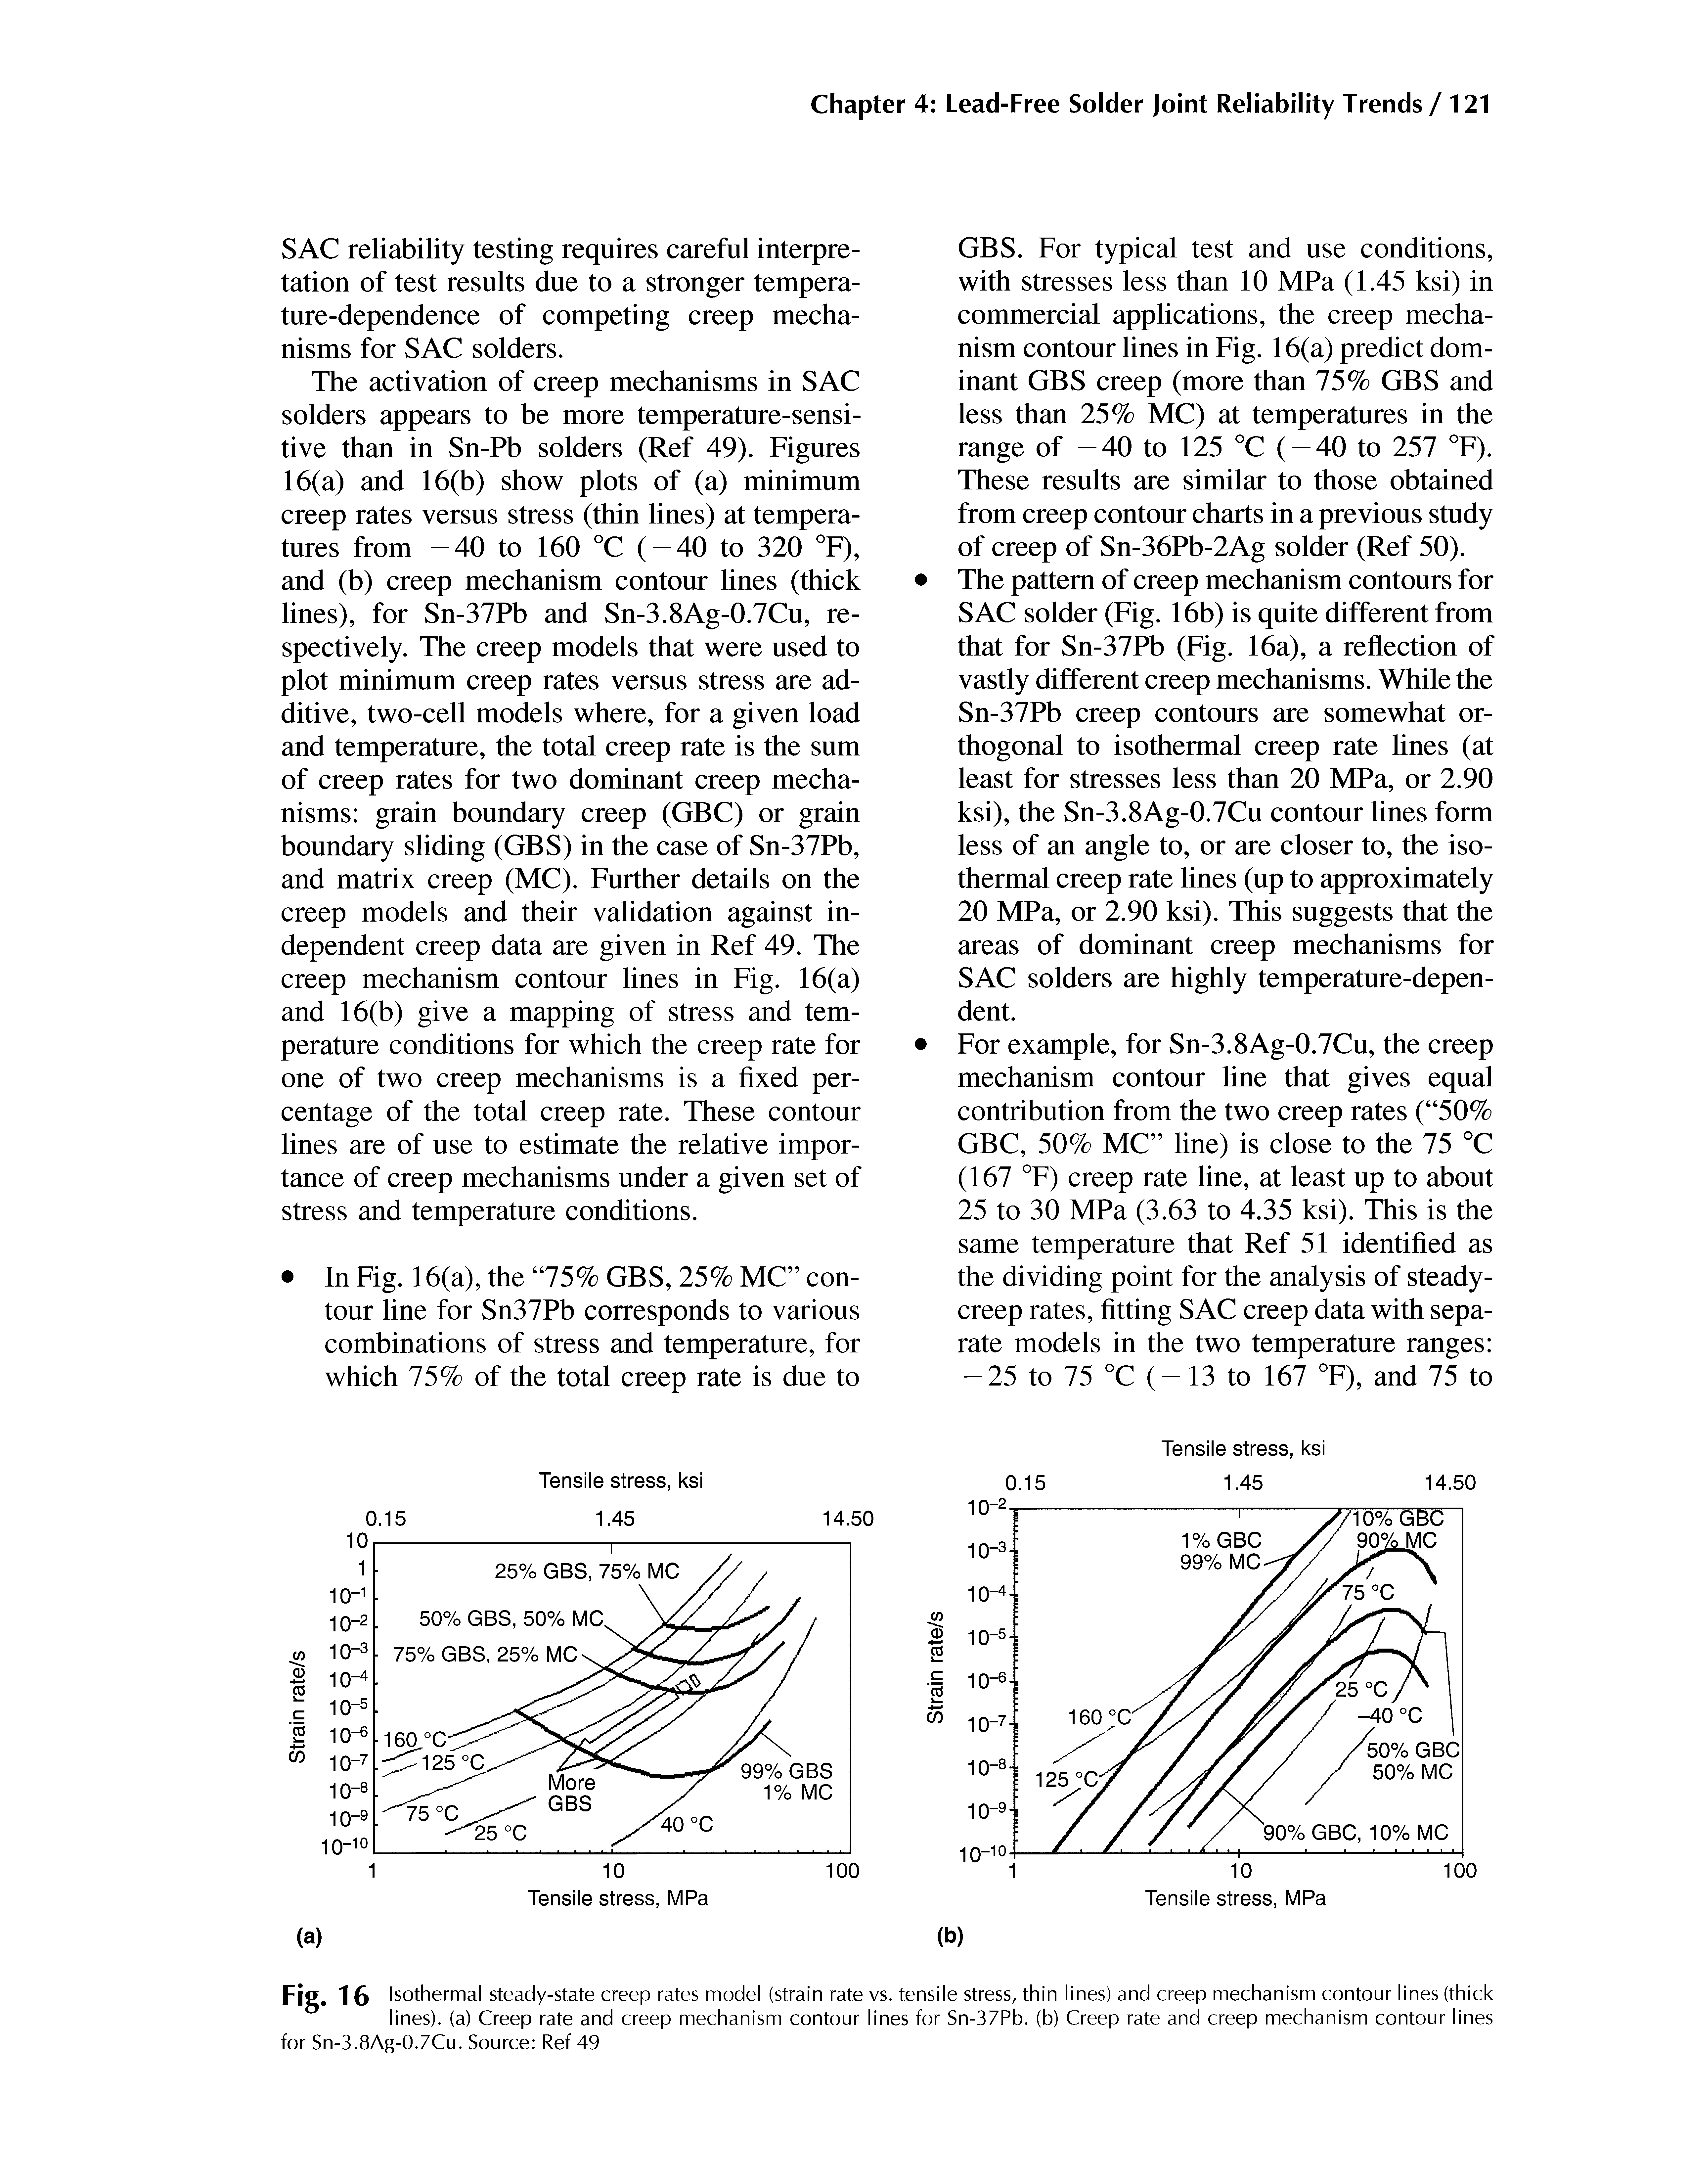 Fig. 16 Isothermal steady-state creep rates model (strain rate vs. tensile stress, thin lines) and creep mechanism contour lines (thick lines), (a) Creep rate and creep mechanism contour lines for Sn-37Pb. (b) Creep rate and creep mechanism contour lines for Sn-3.8Ag-0.7Cu. Source Ref 49...